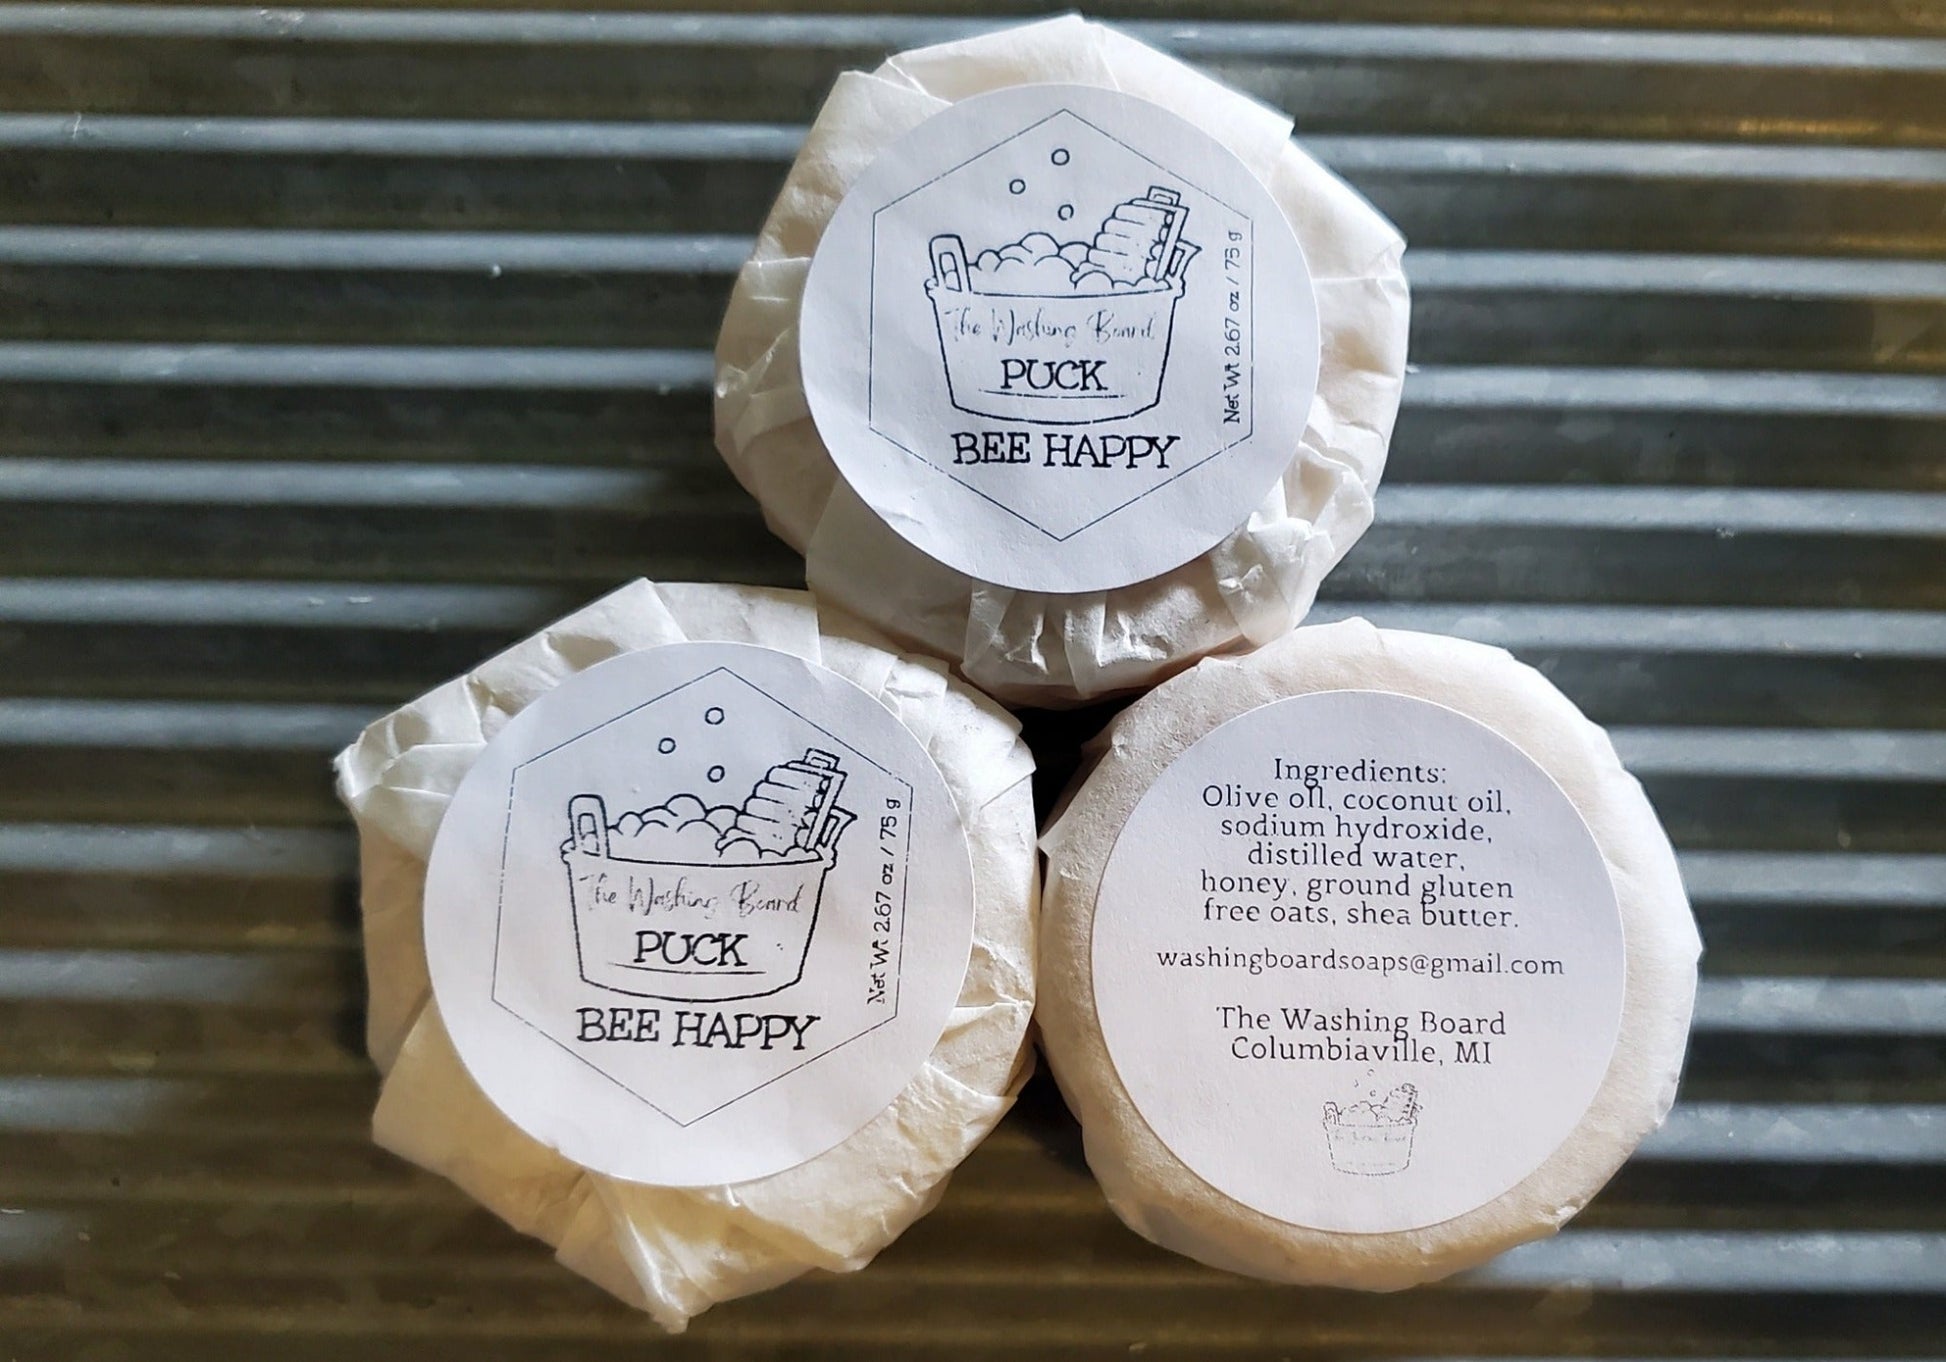 Bee Happy puck shown with label and ingredient label